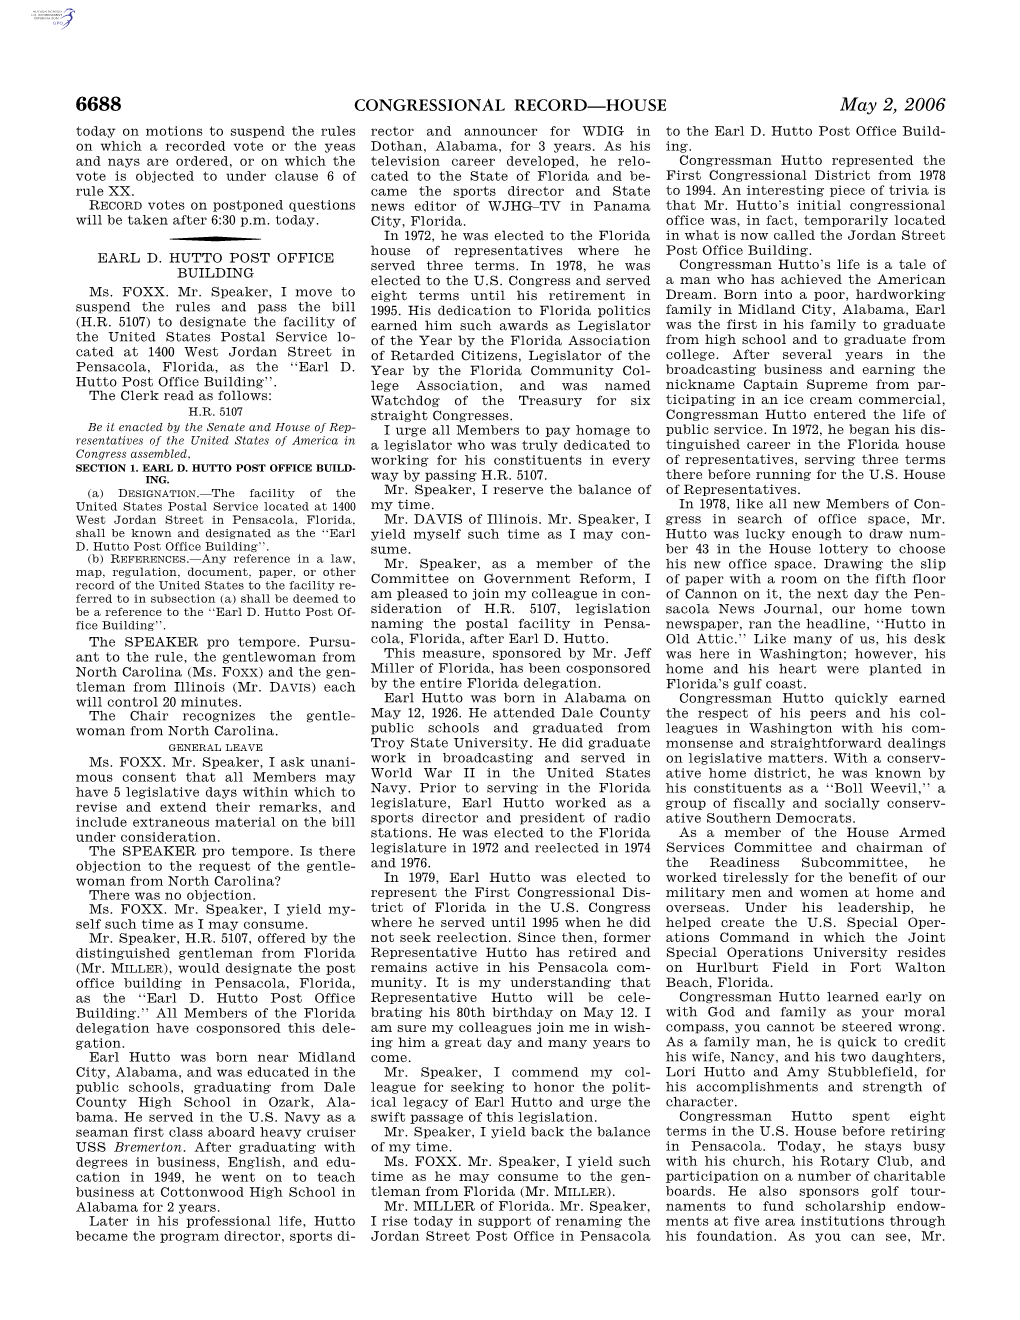 CONGRESSIONAL RECORD—HOUSE May 2, 2006 Today on Motions to Suspend the Rules Rector and Announcer for WDIG in to the Earl D